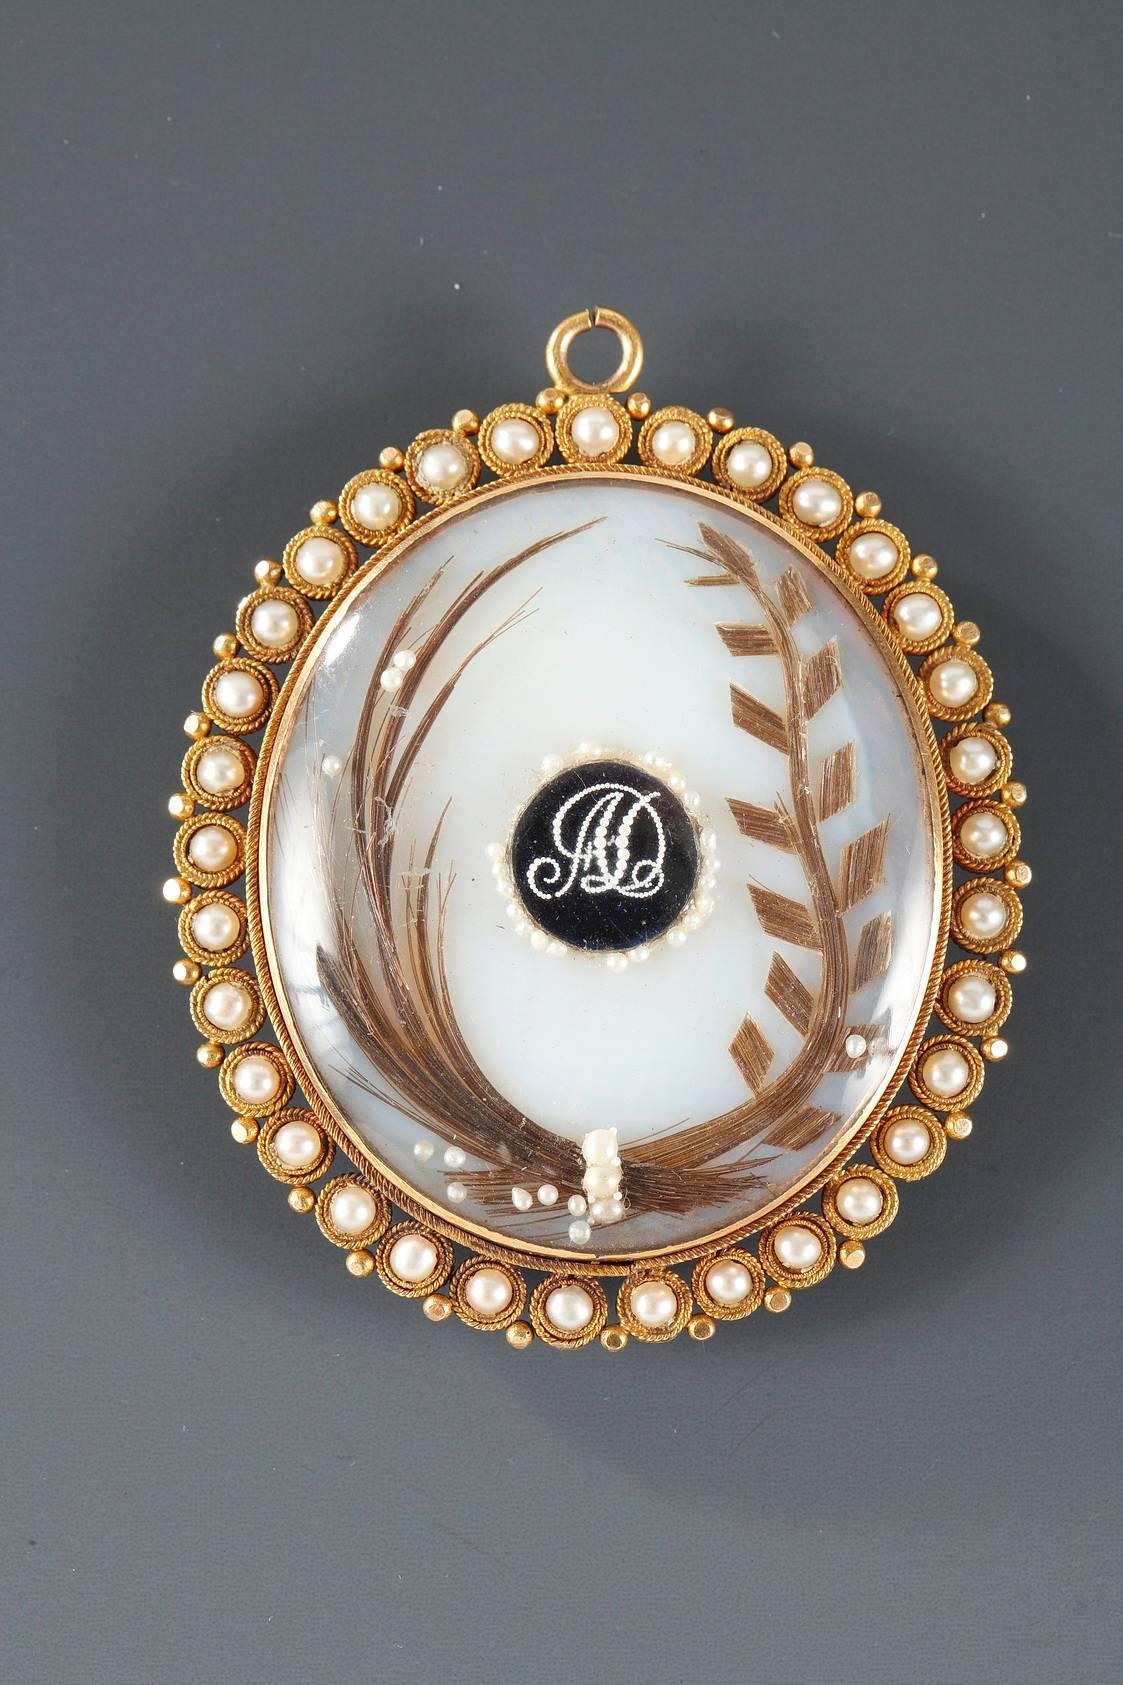 Mother of pearl medallion depicting a refined young gentleman on a light pink background. The pendant is mounted in gold that is set with pearls. The back is decorated with the monogram “AD” and locks of hair that are attached with delicate pearls.